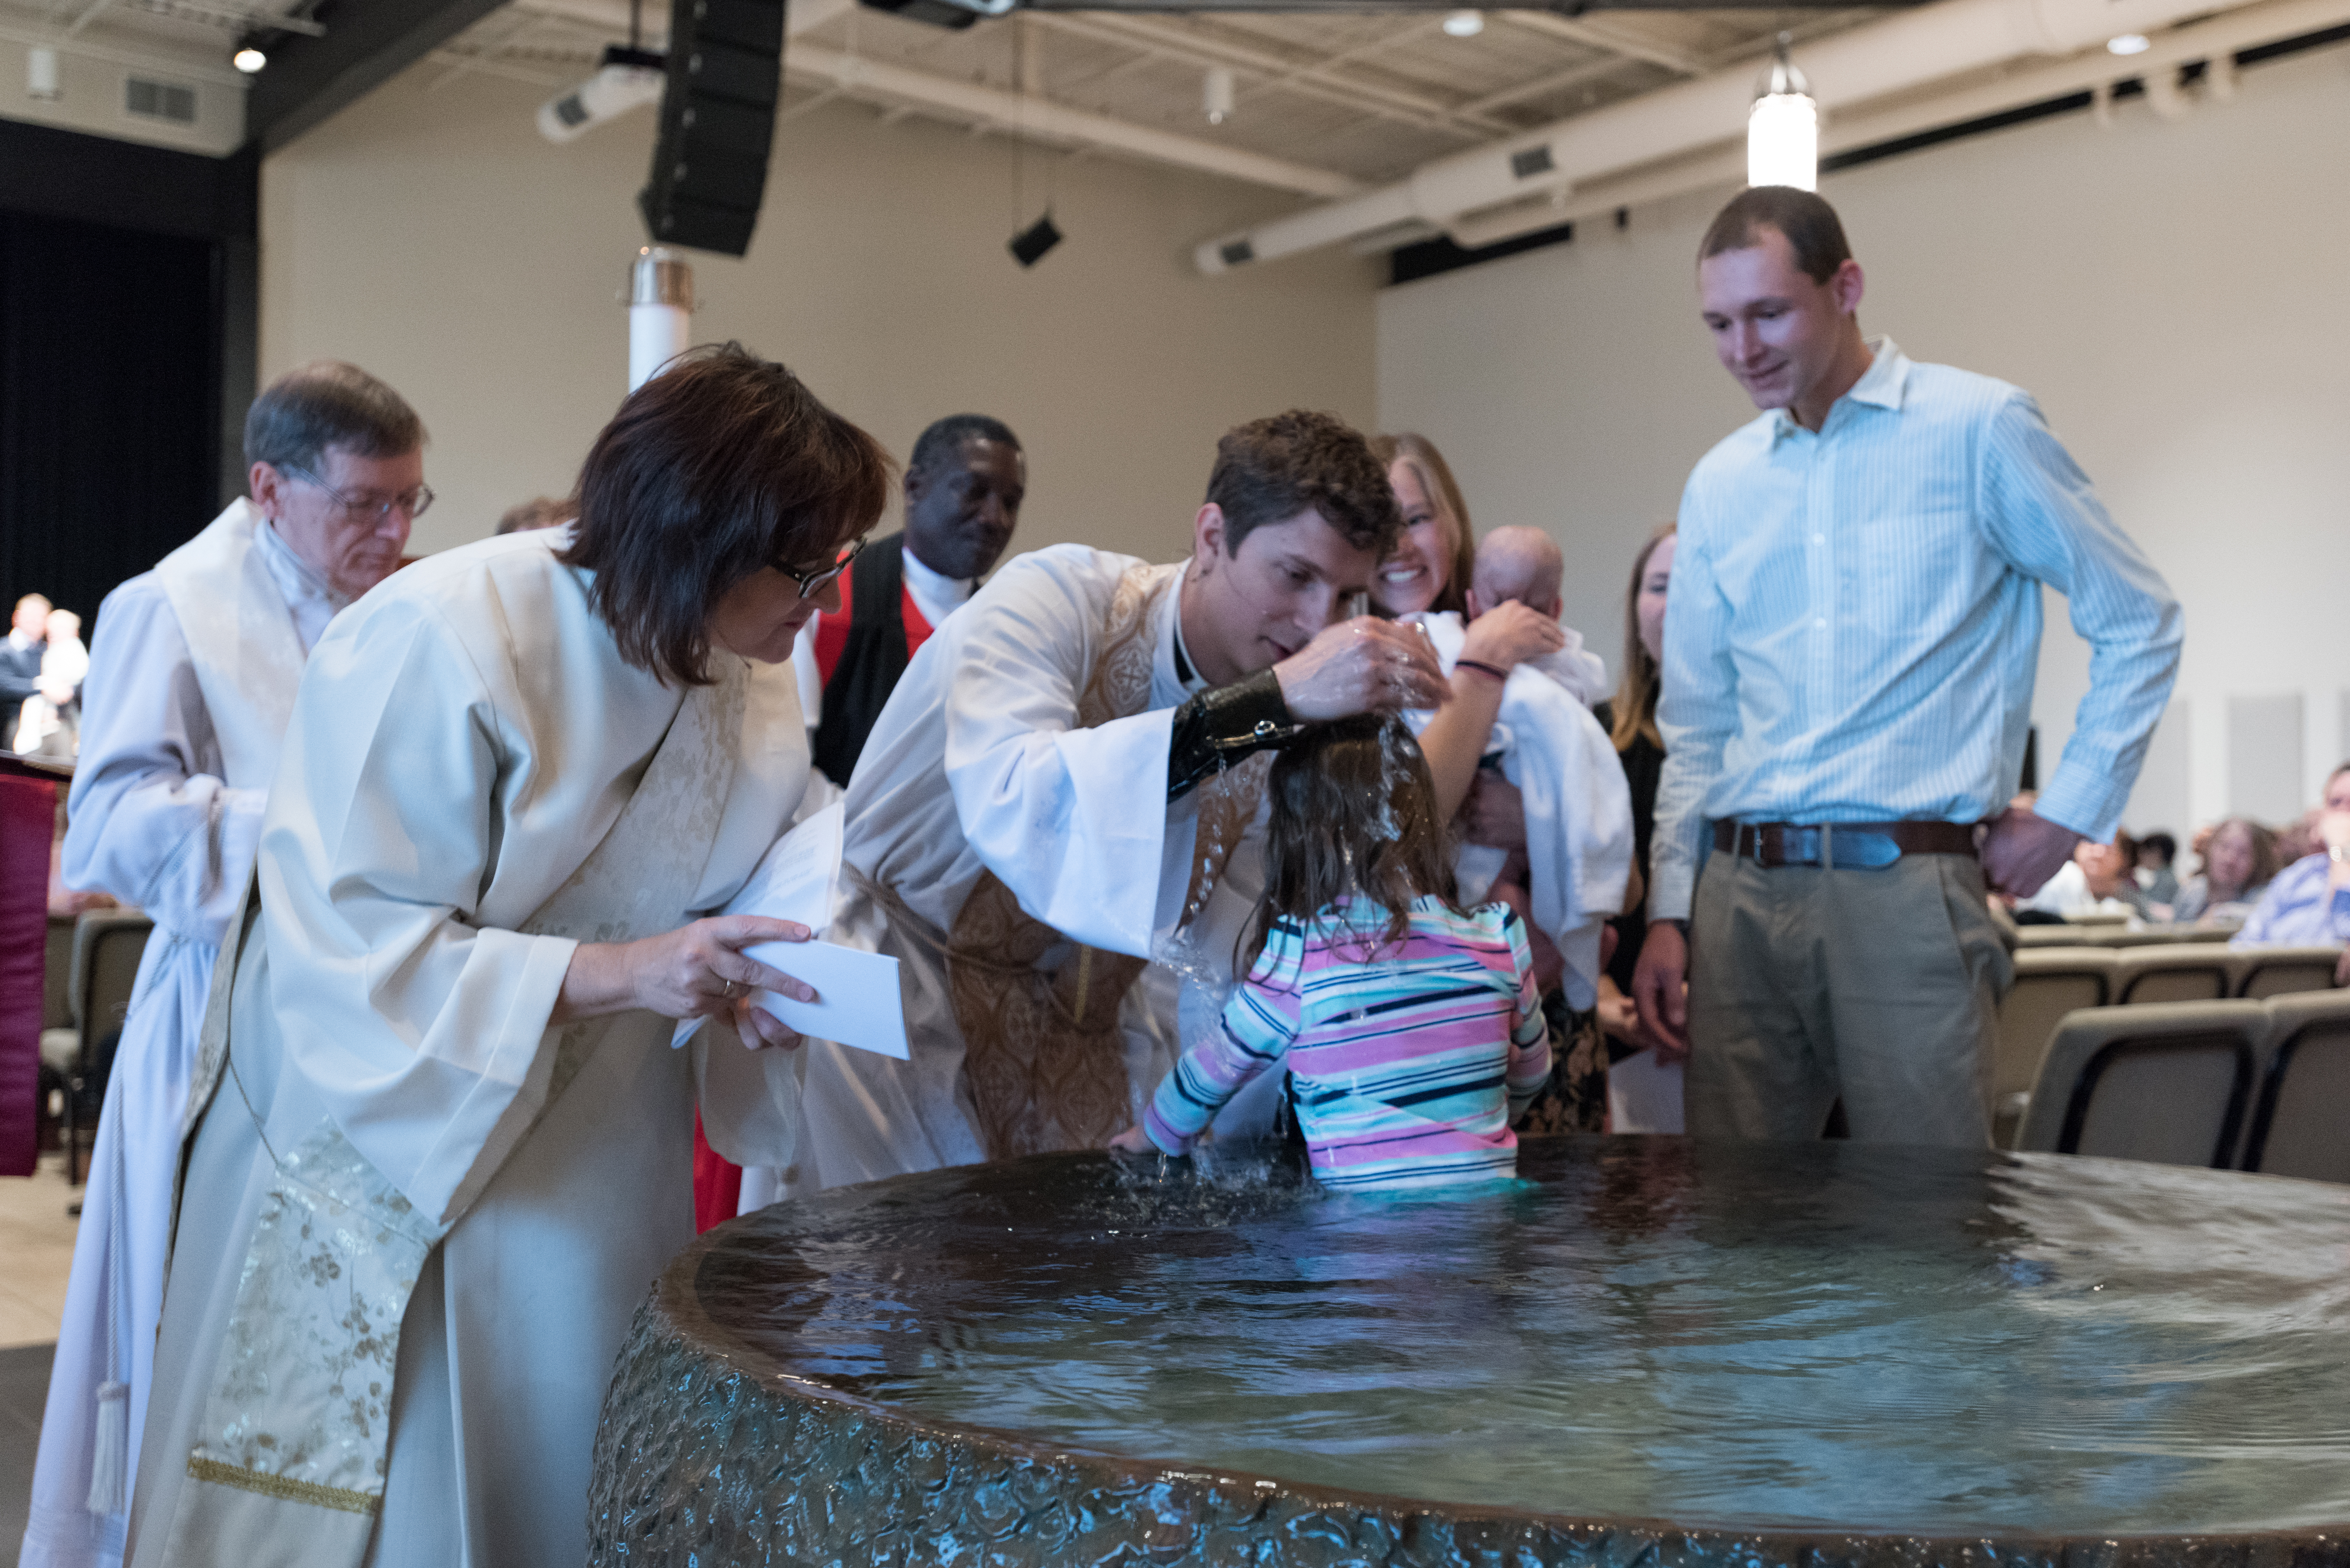 Anglican baptism service, child being baptized by priest